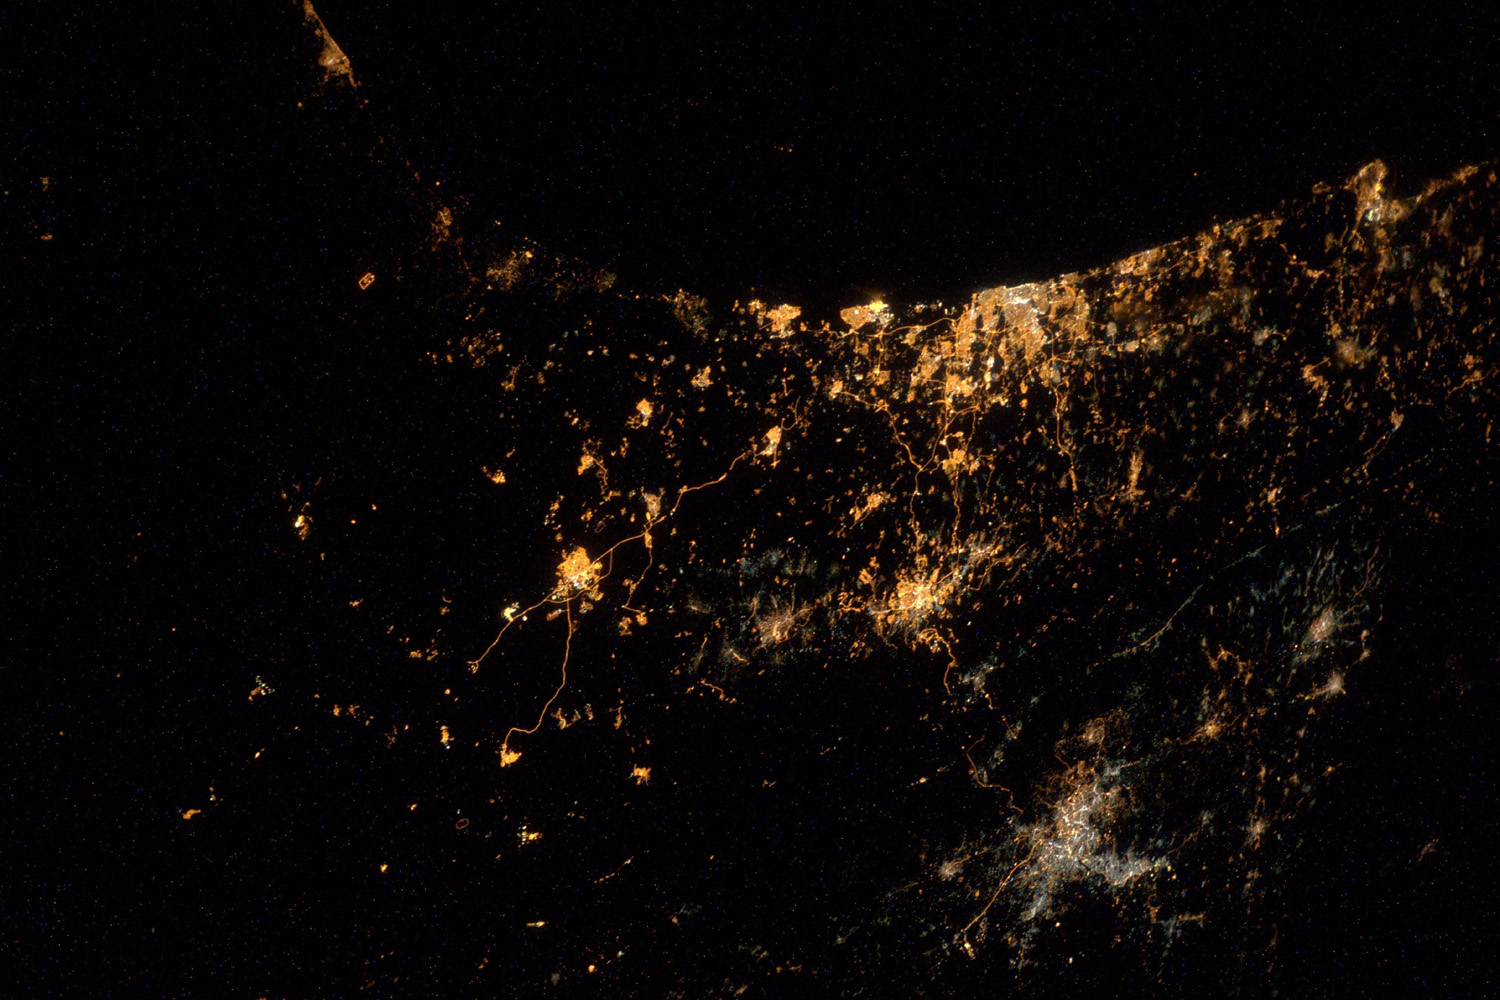 Nasa: image of rockets firing between Israel and Gaza while on board the ISS